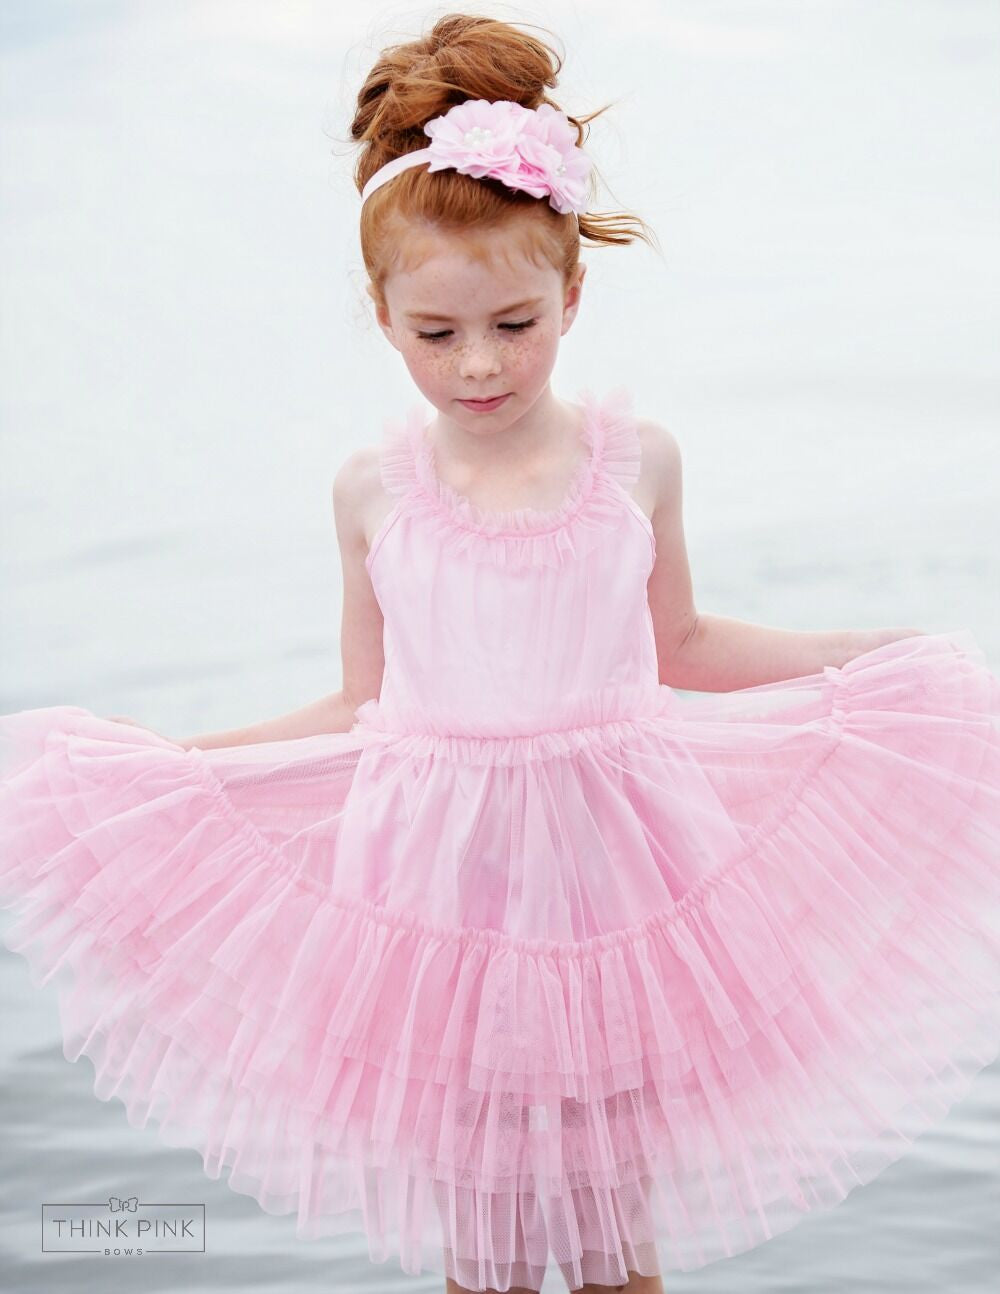 Pretty in Pink Tulle Dress - Think Pink Bows - 1